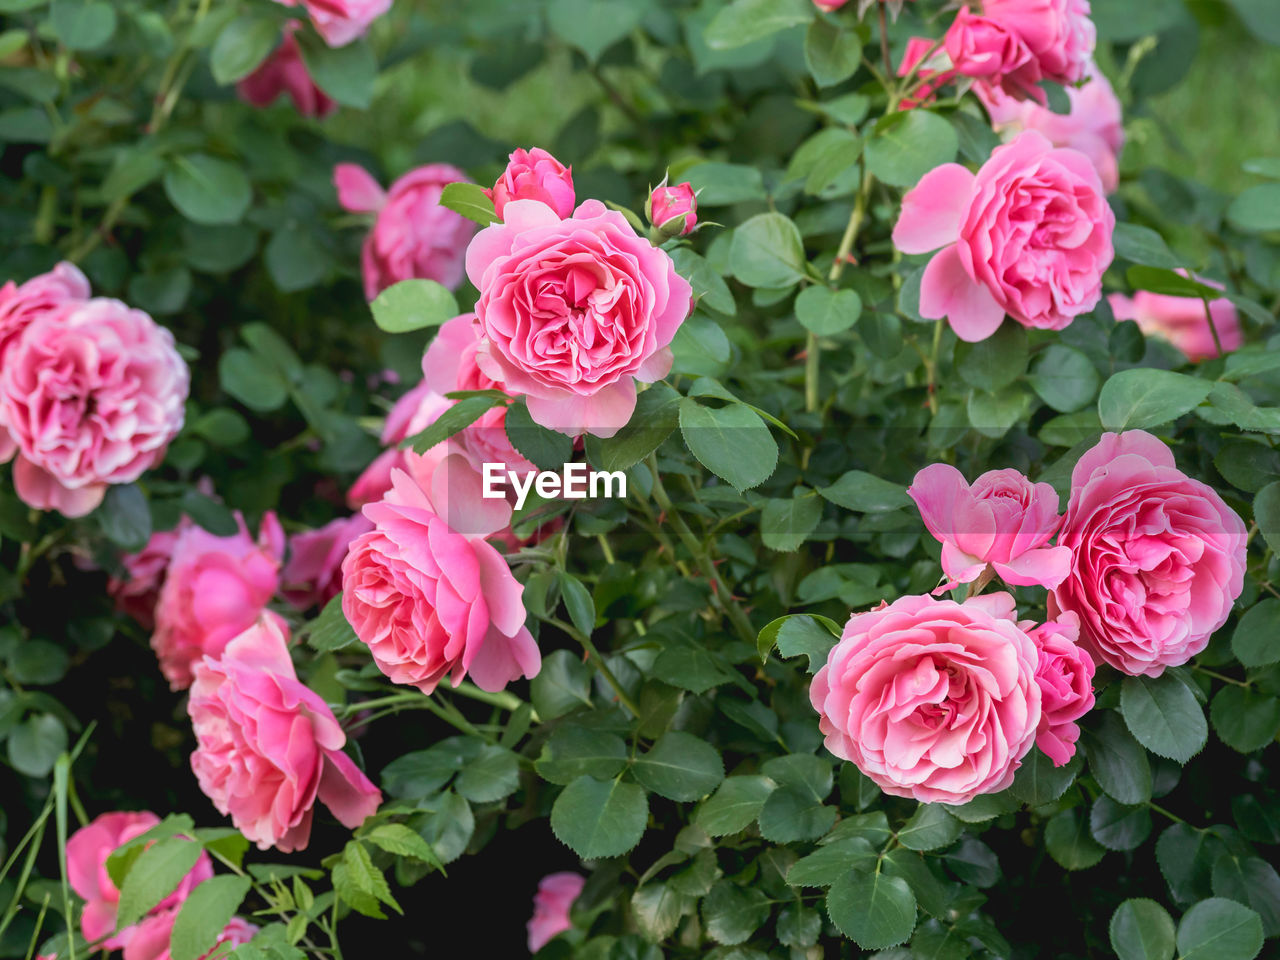 flower, flowering plant, plant, rose, pink, beauty in nature, garden roses, plant part, leaf, freshness, nature, petal, flower head, inflorescence, close-up, no people, fragility, growth, green, outdoors, day, high angle view, bush, springtime